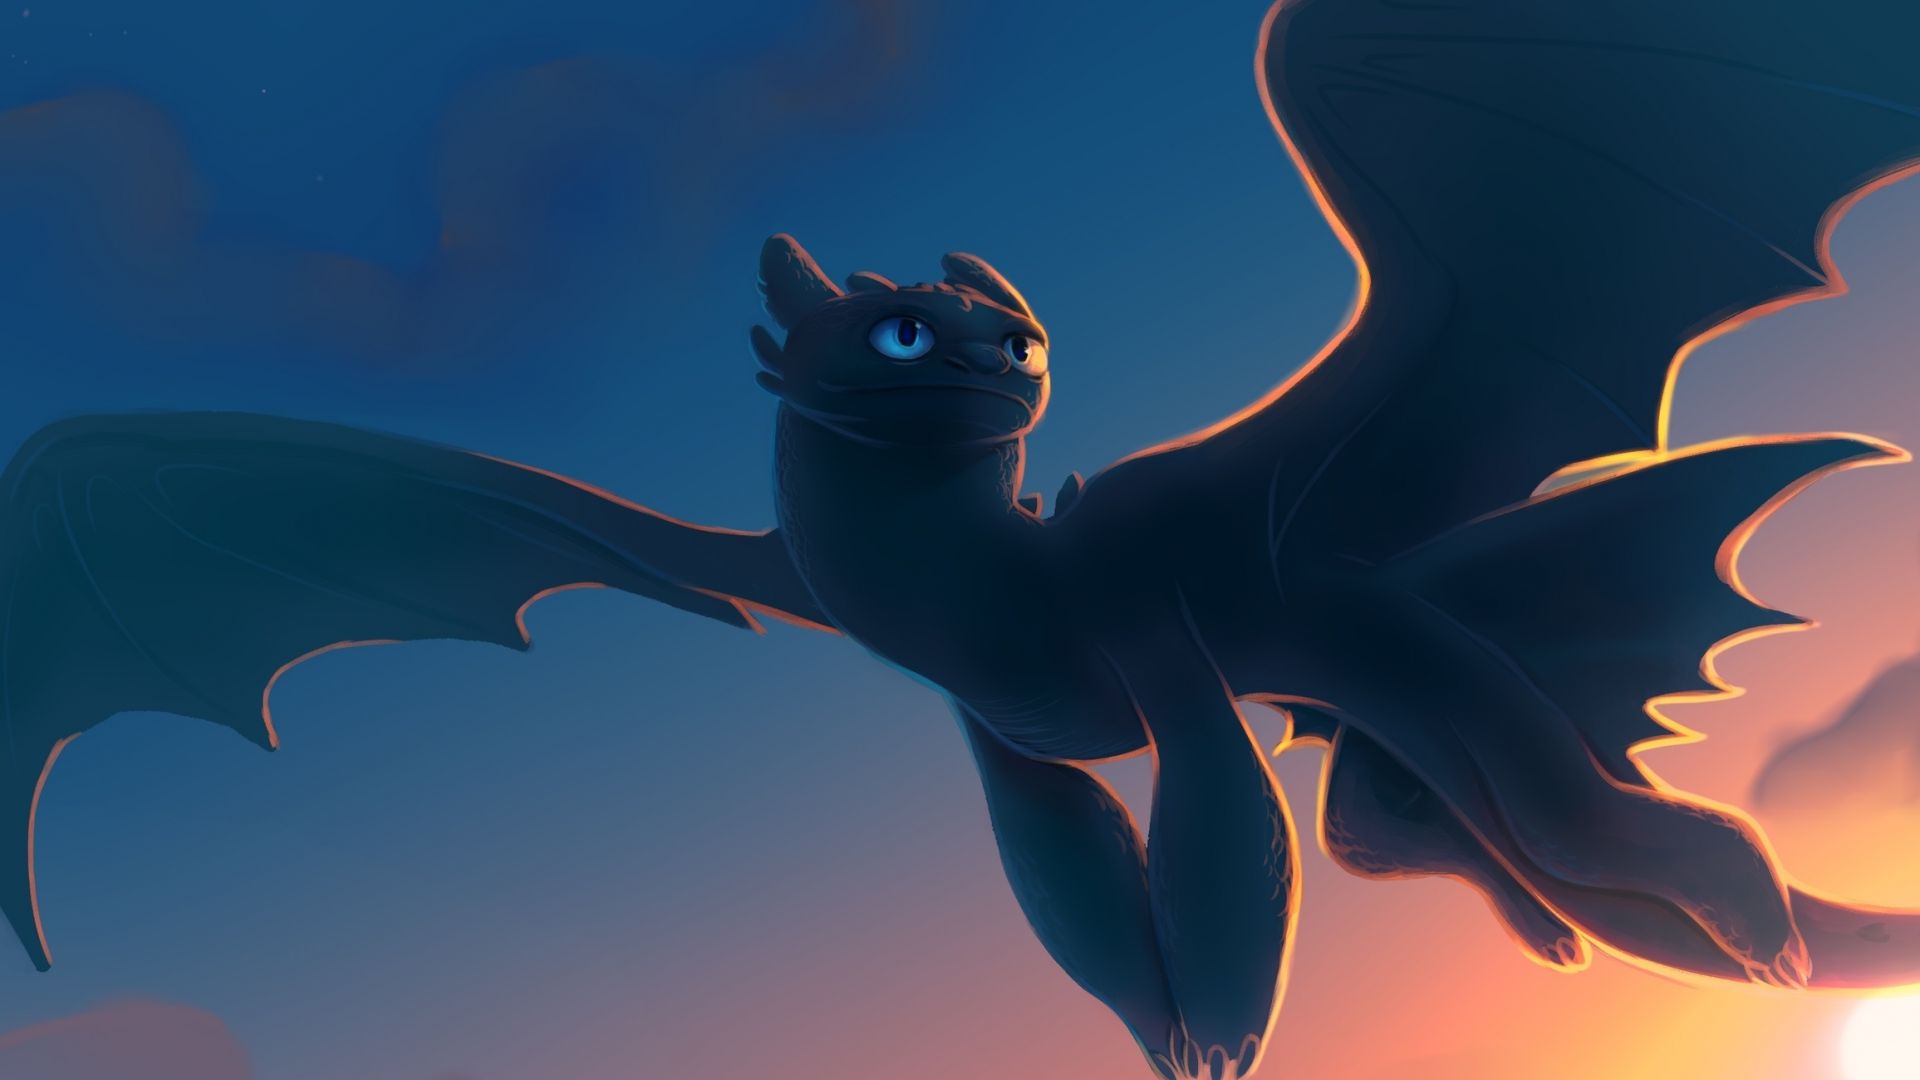 Desktop Wallpaper Toothless Movie How To Train Your Dragon